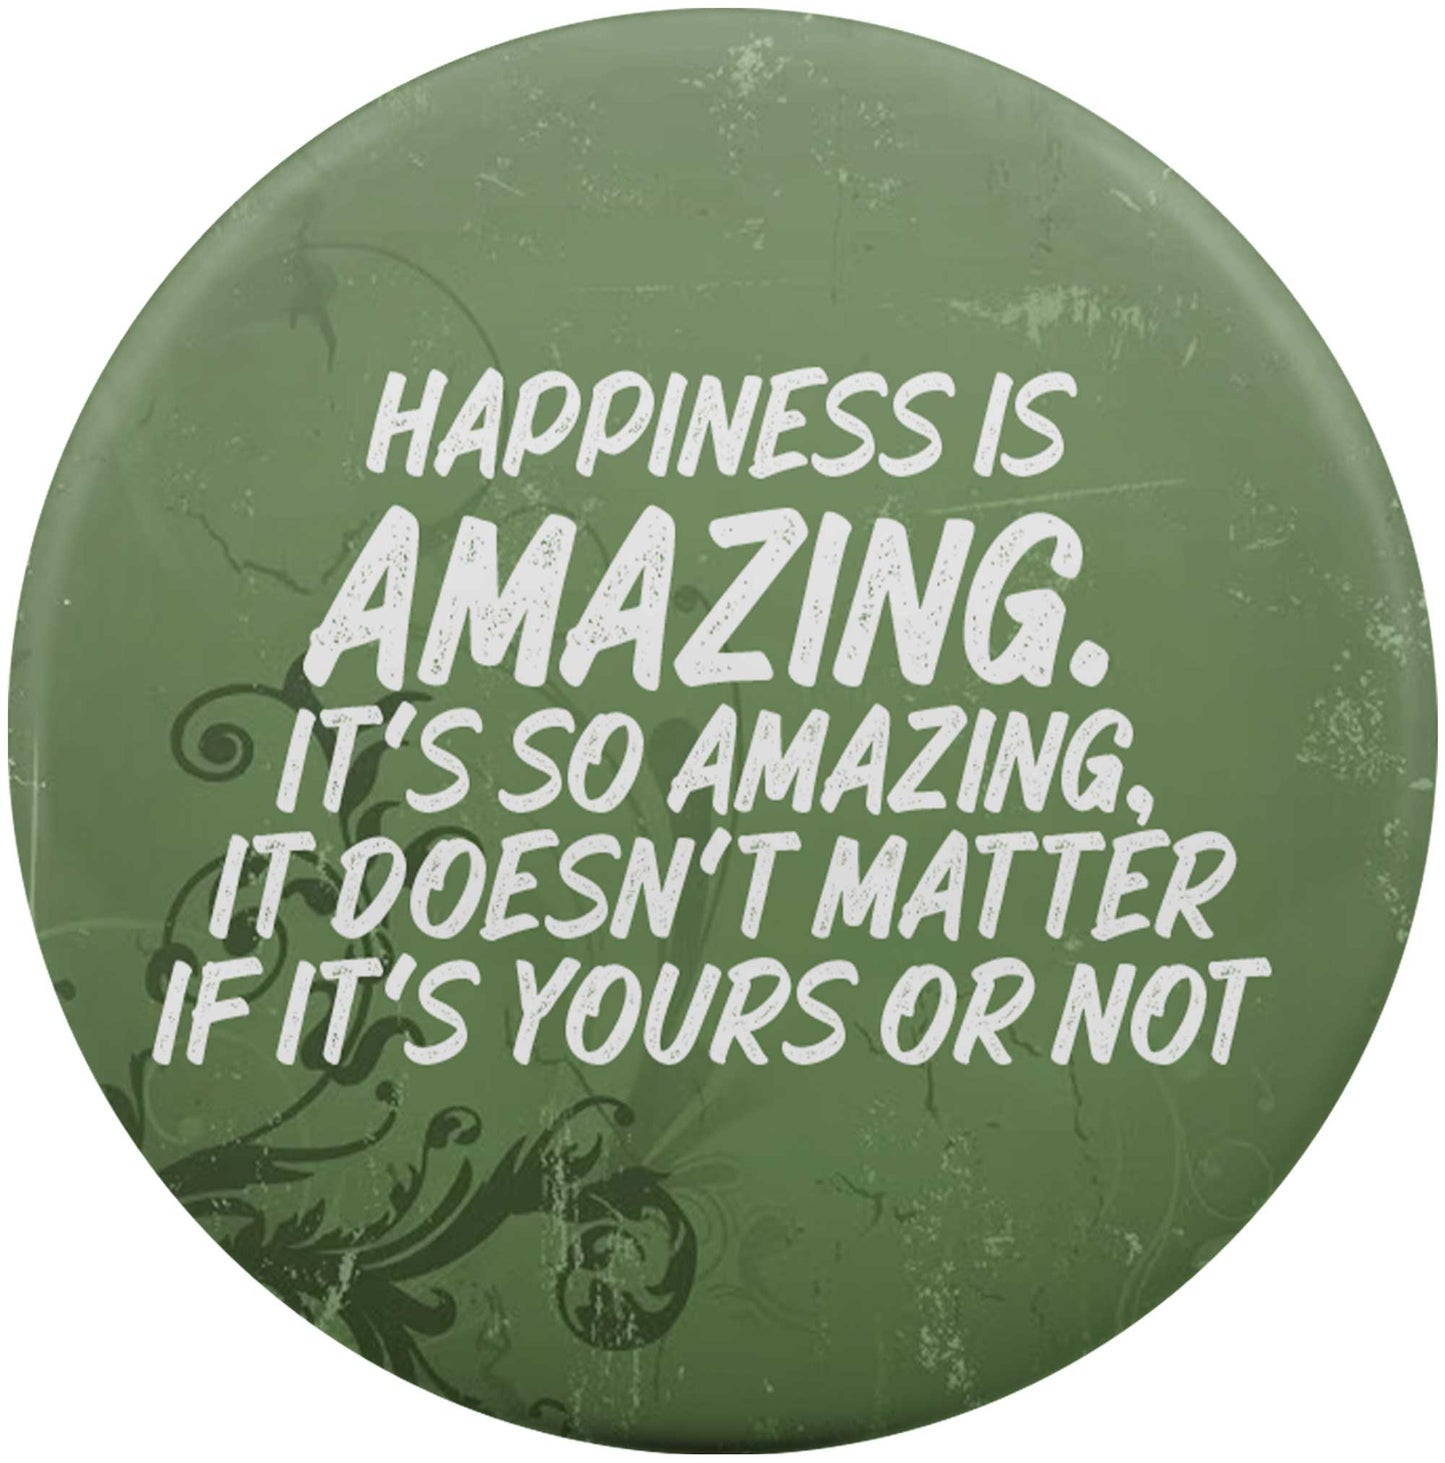 Happiness Is Amazing, It Doesn't Matter If It's Yours Or Not